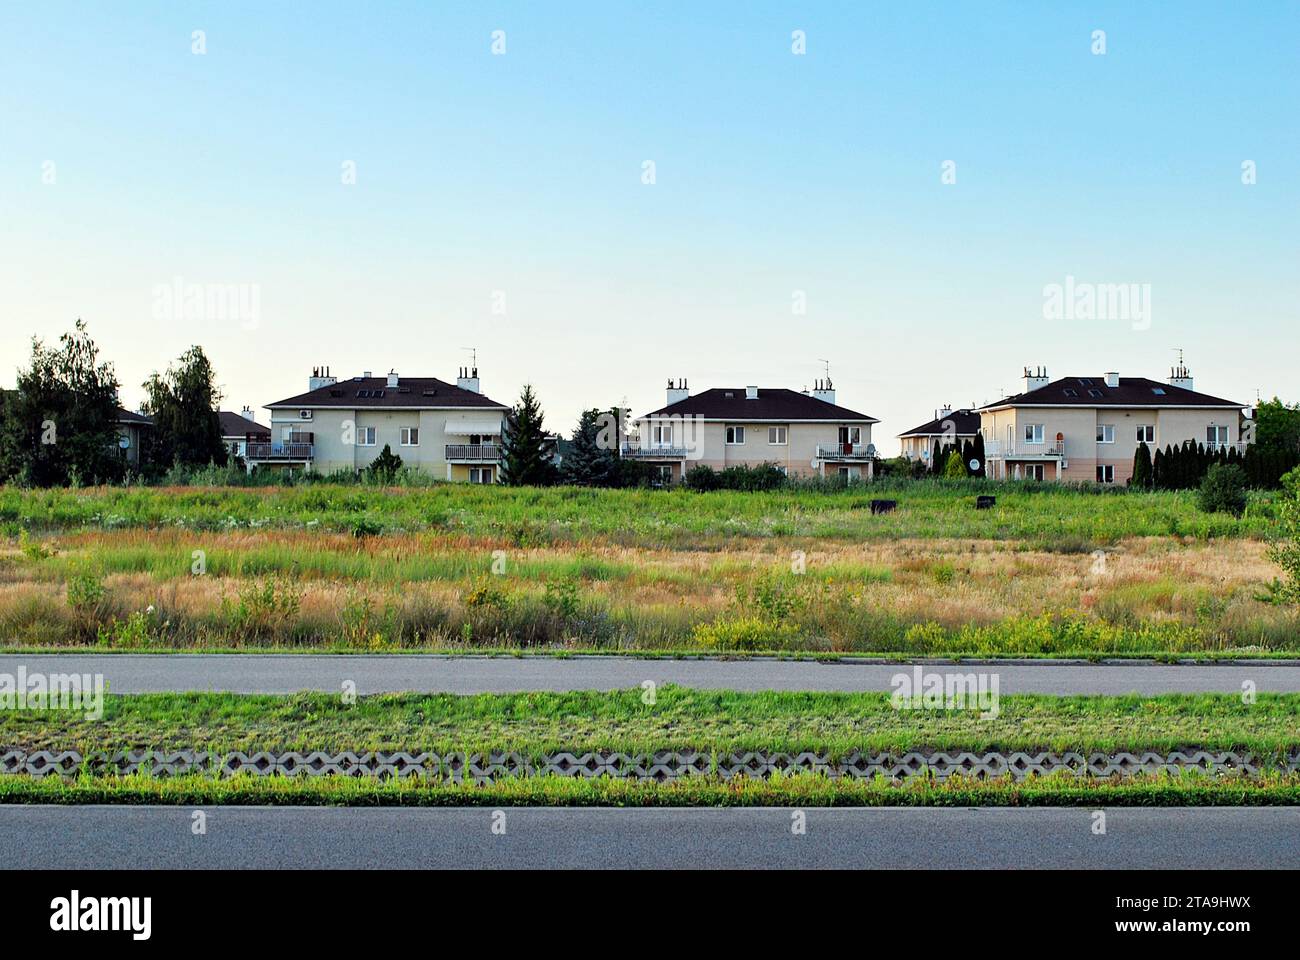 New single family house in a new development area. Residential home with modern facade. Stock Photo